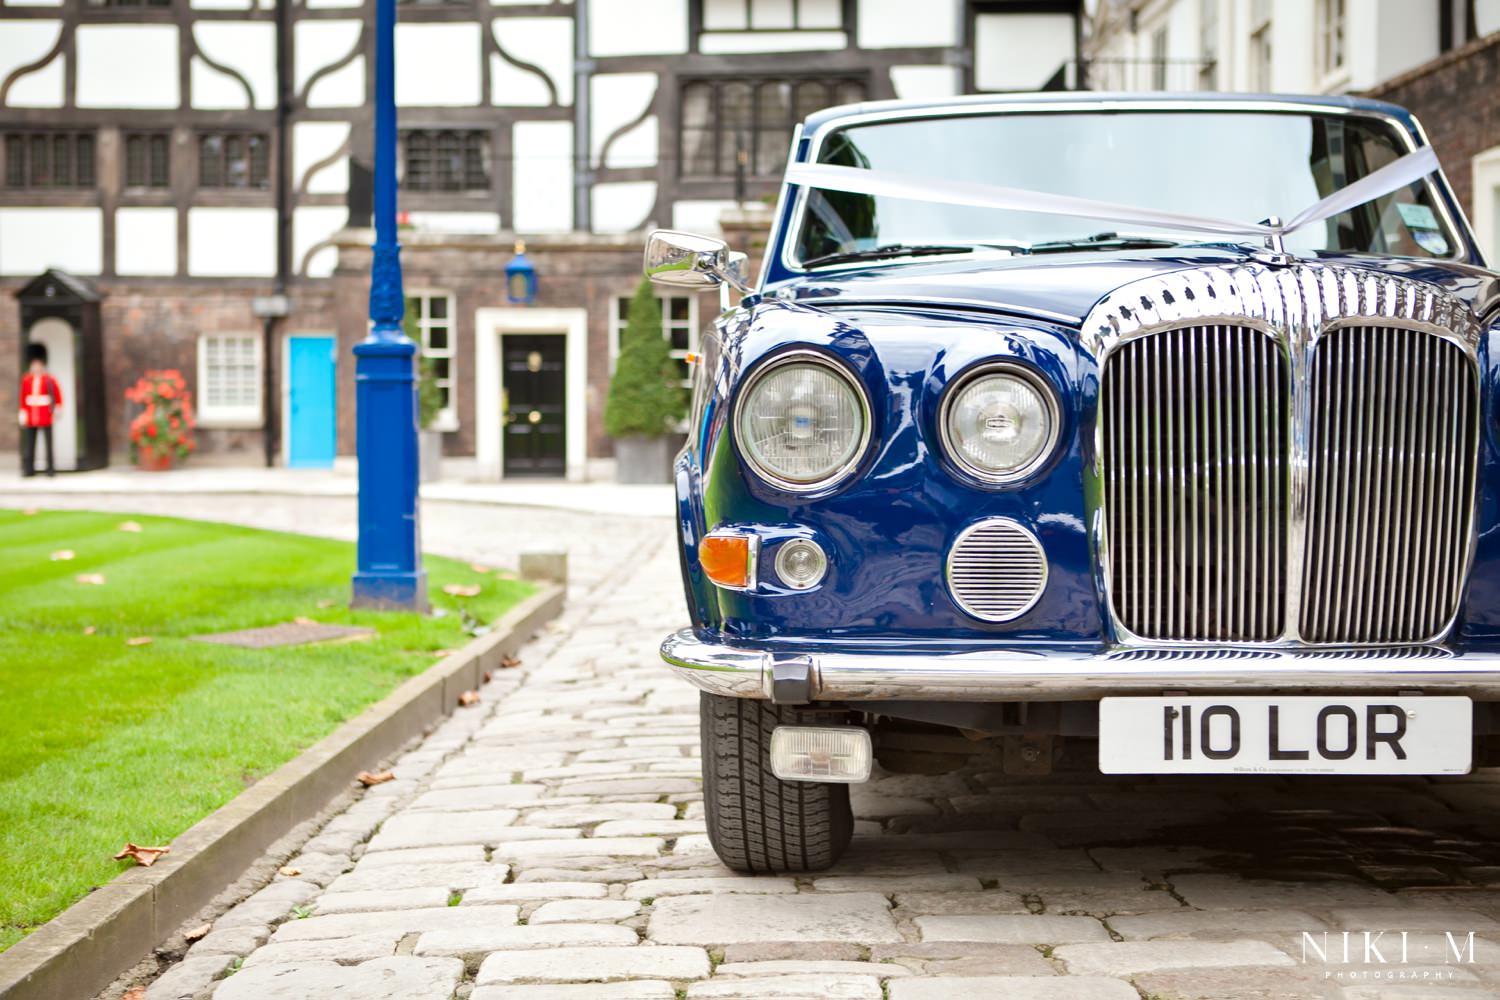 Lord Cars Vintage Rolls Royce hire in London